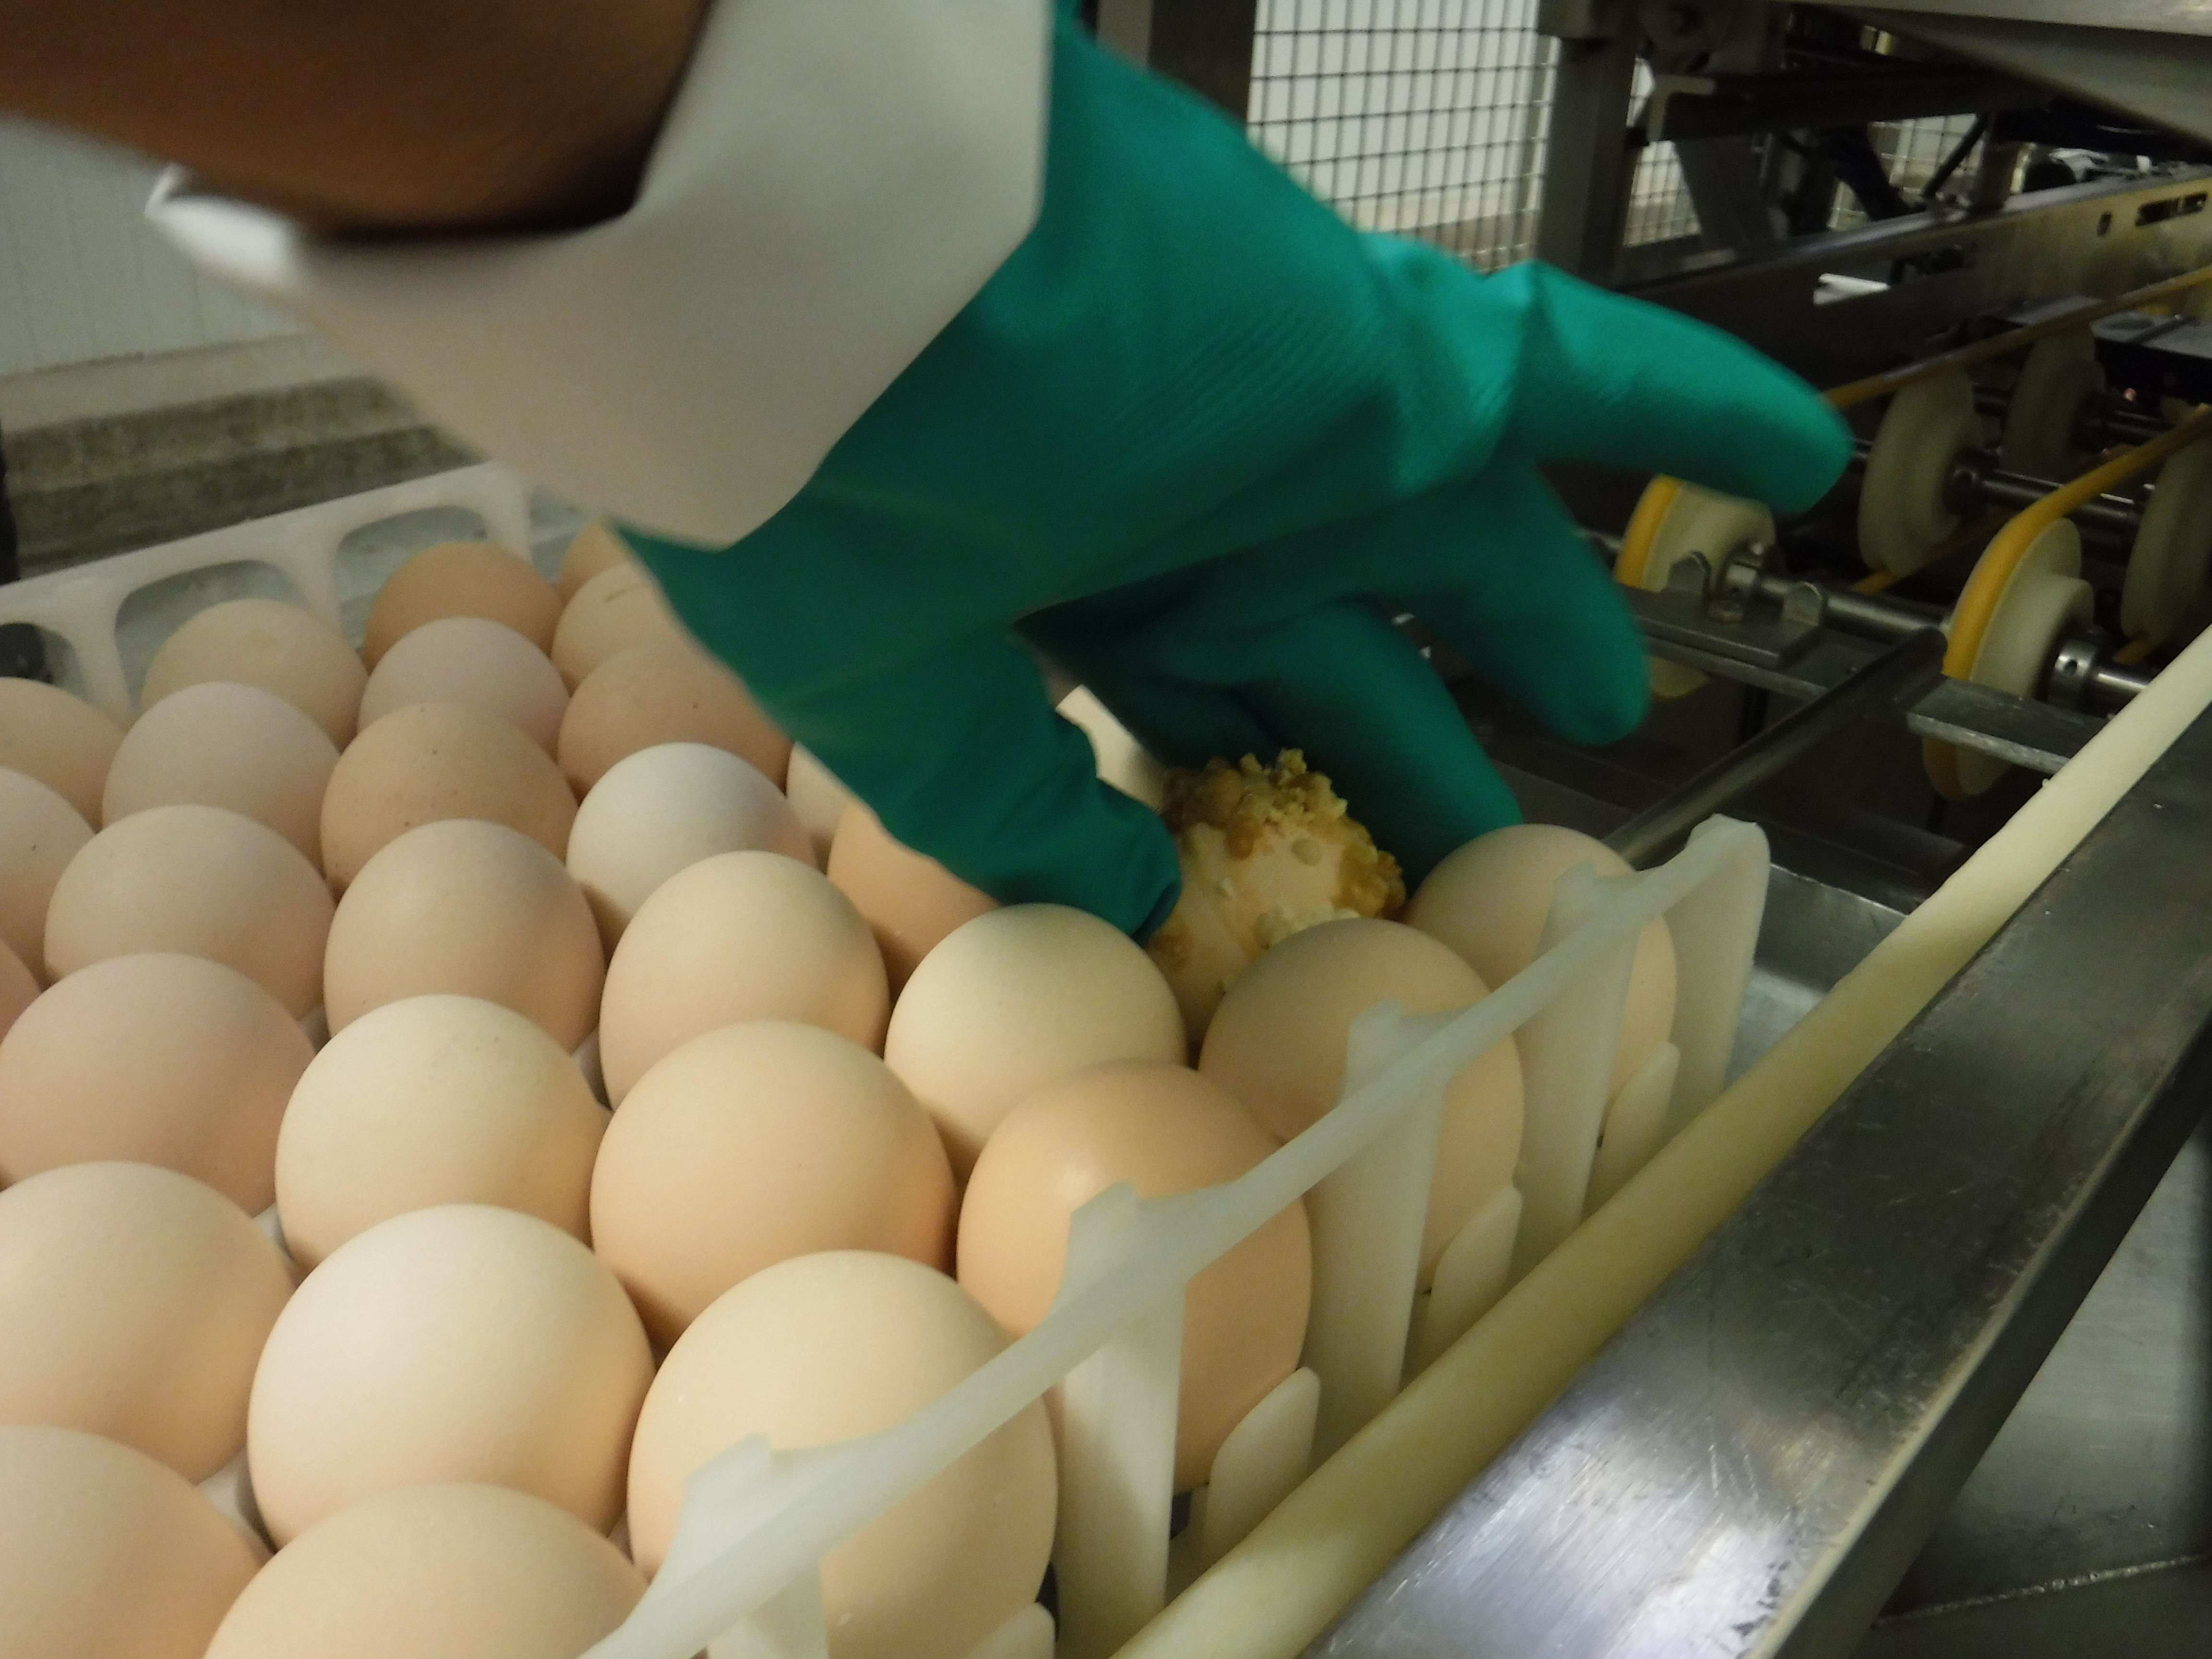 a hand covered with a rubber glove removes a rotton egg from an egg tray